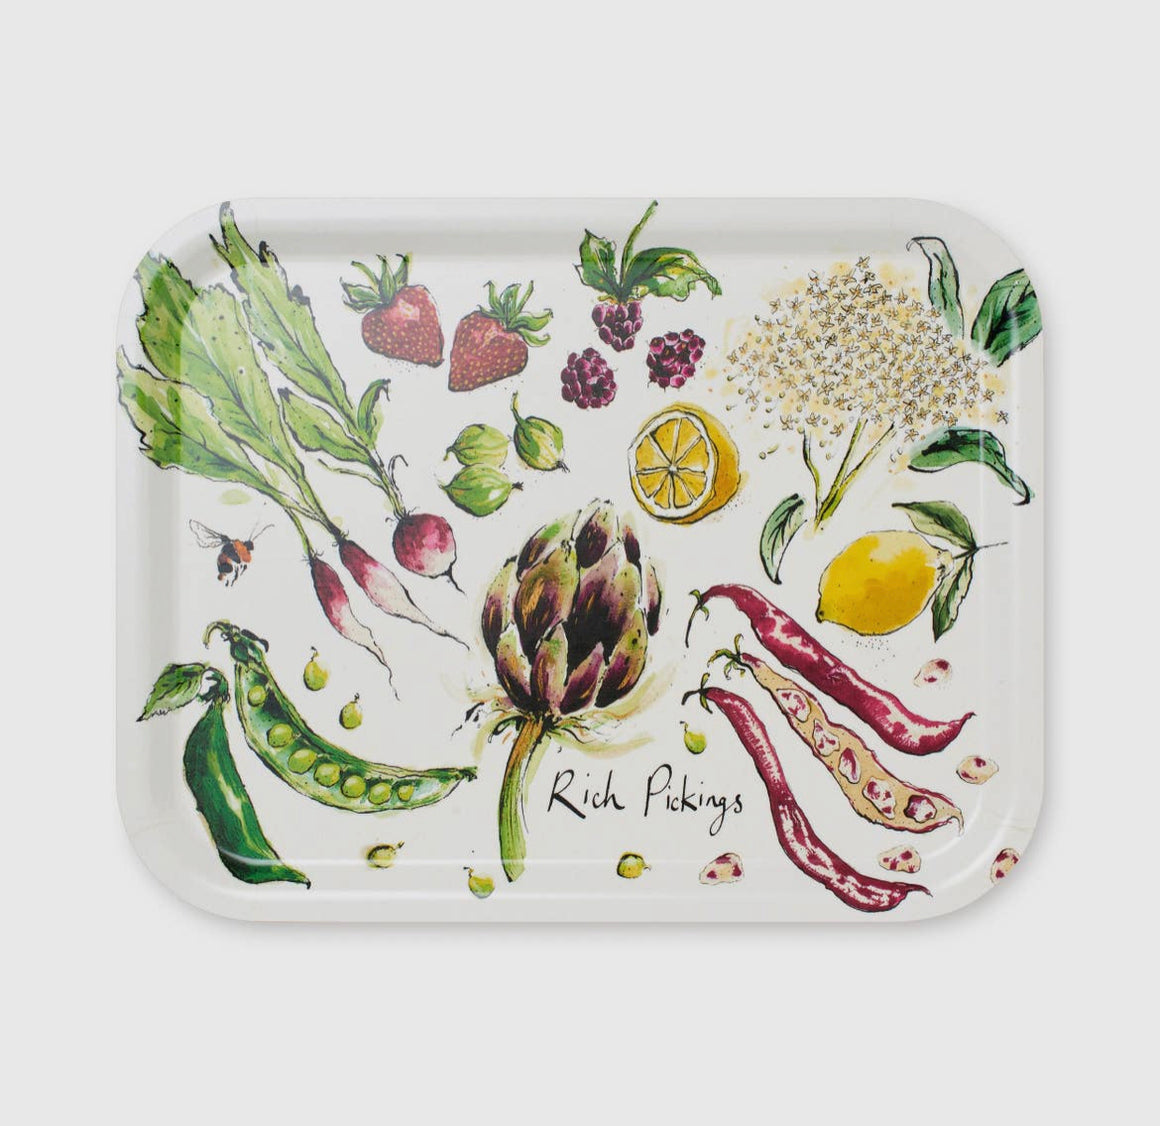 “RICH PICKINGS” SERVING TRAY BY ANNA WRIGHT